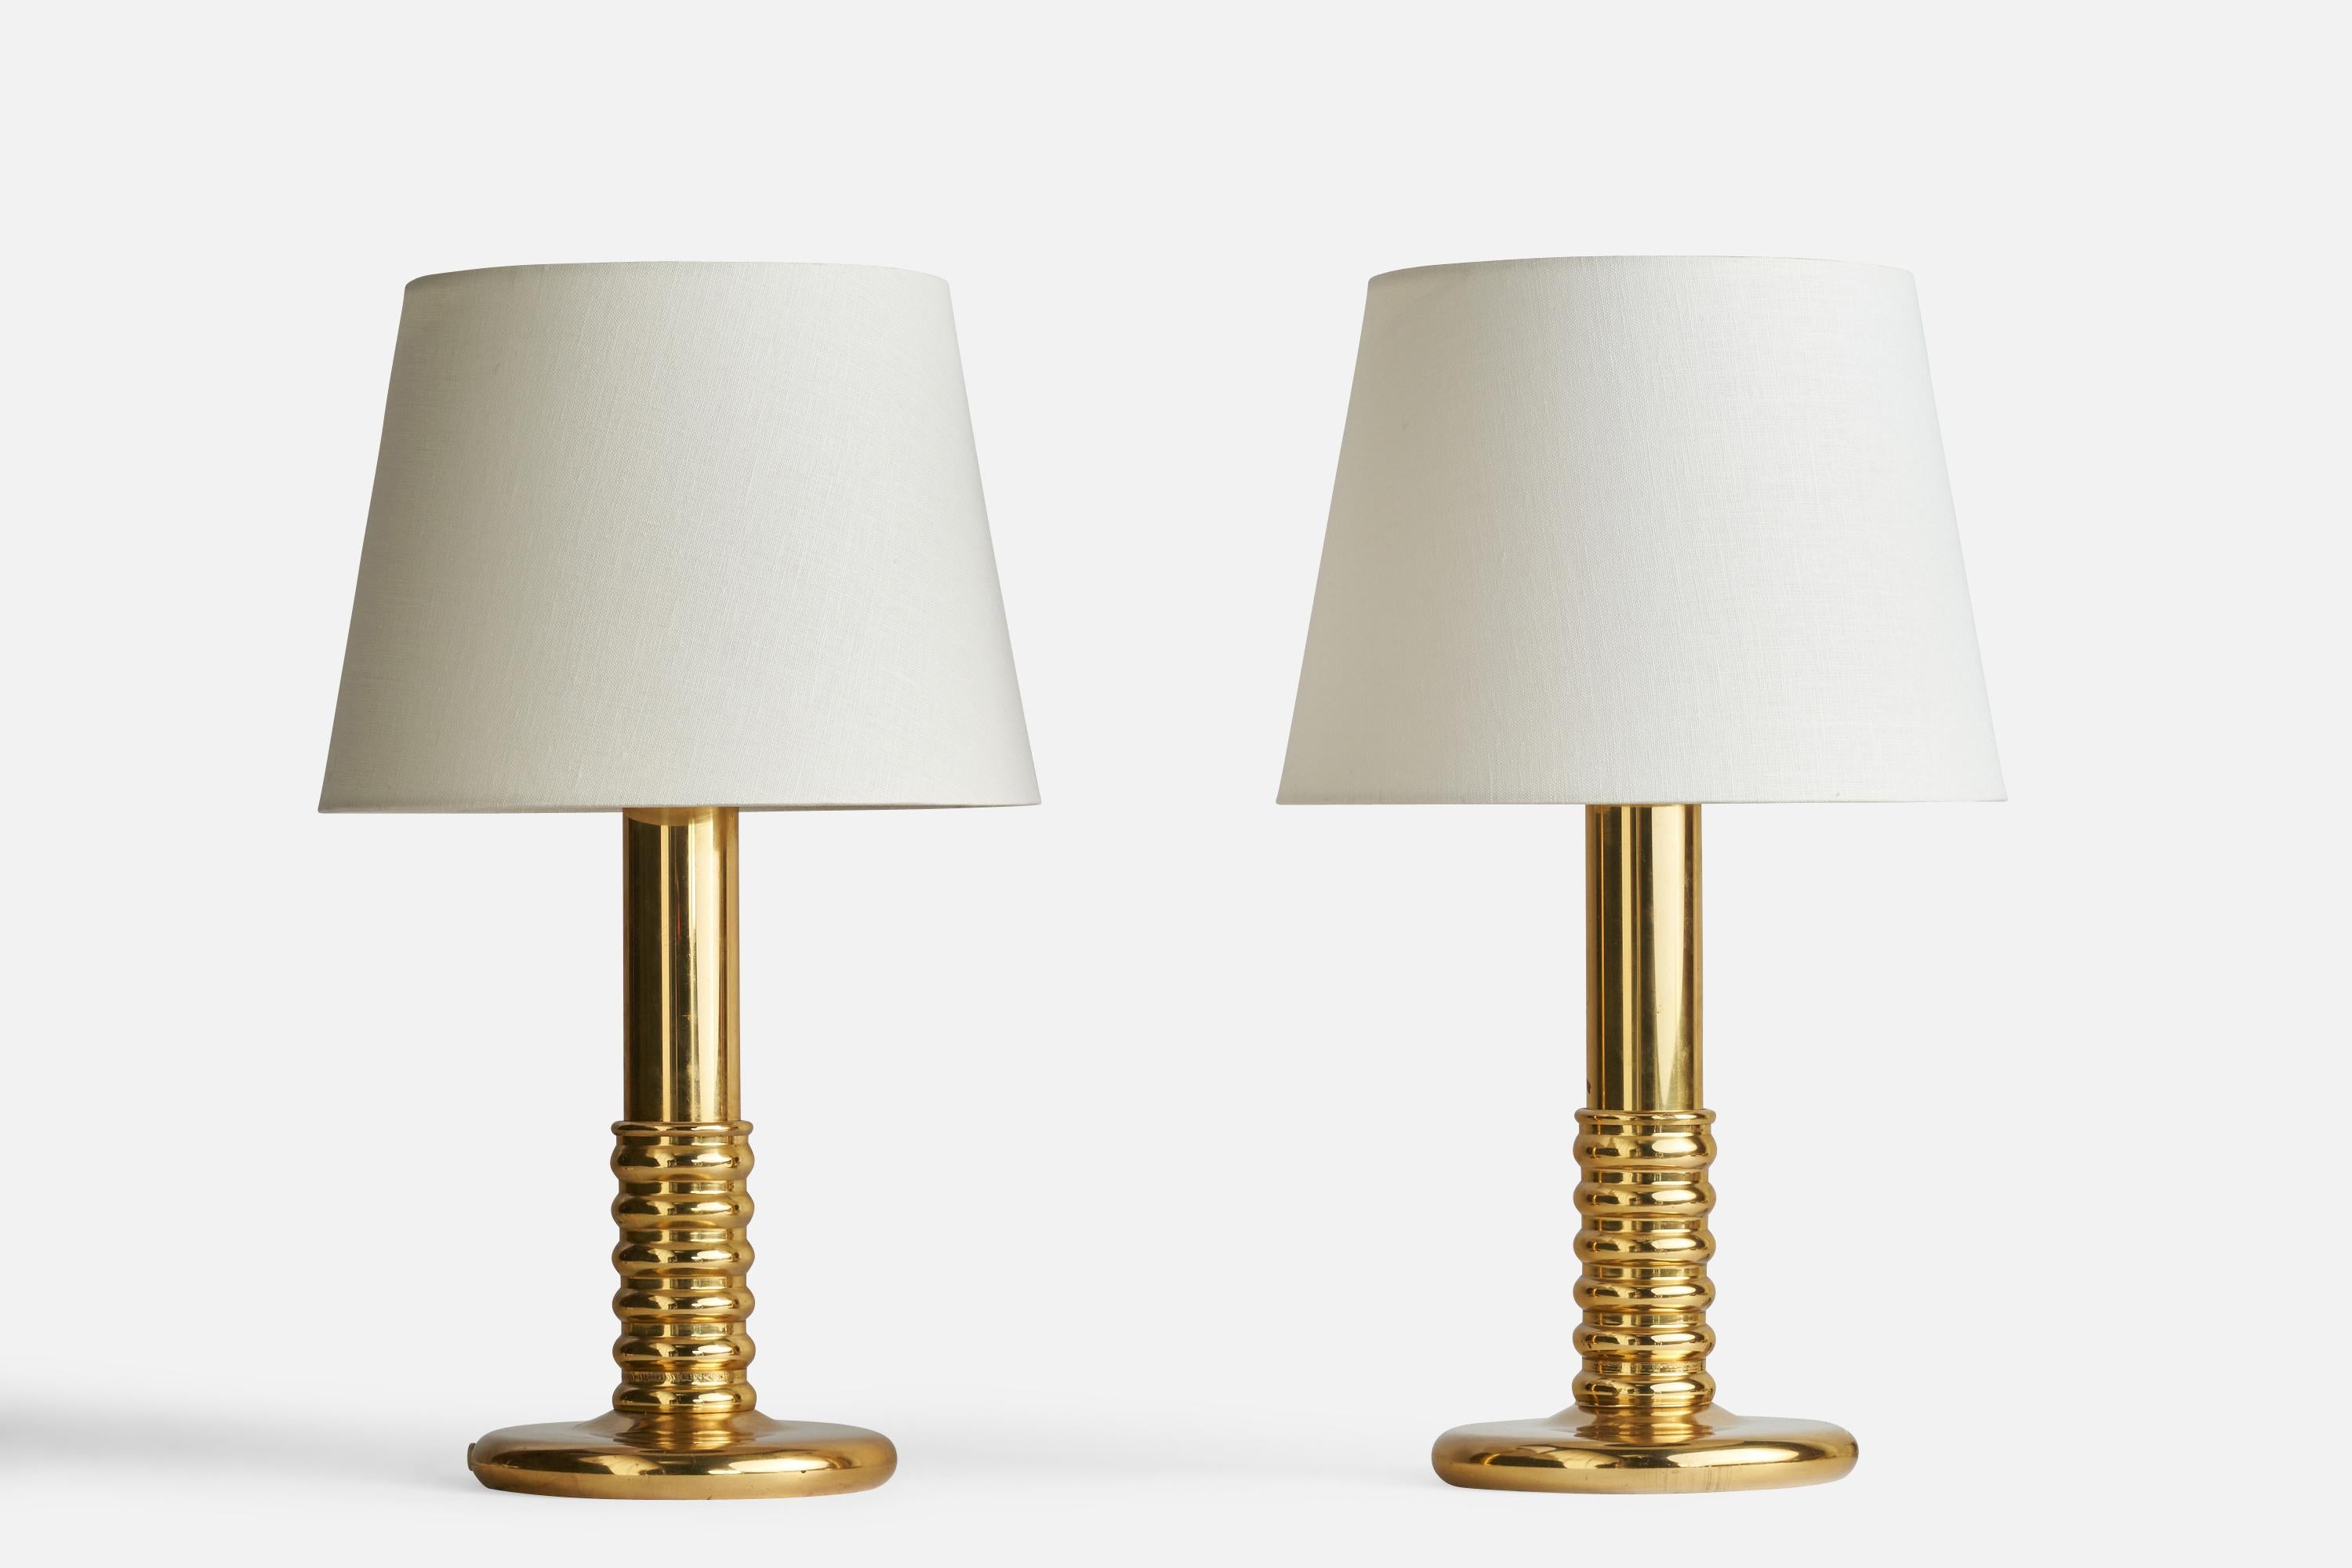 A pair of table lamps designed and produced in Sweden, 1970s.

Dimensions of Lamp (inches): 14.5” H x 7” Diameter
Dimensions of Shade (inches): 9” Top Diameter x 12” Bottom Diameter x 9” H
Dimensions of Lamp with Shade (inches): 20” H x 12”